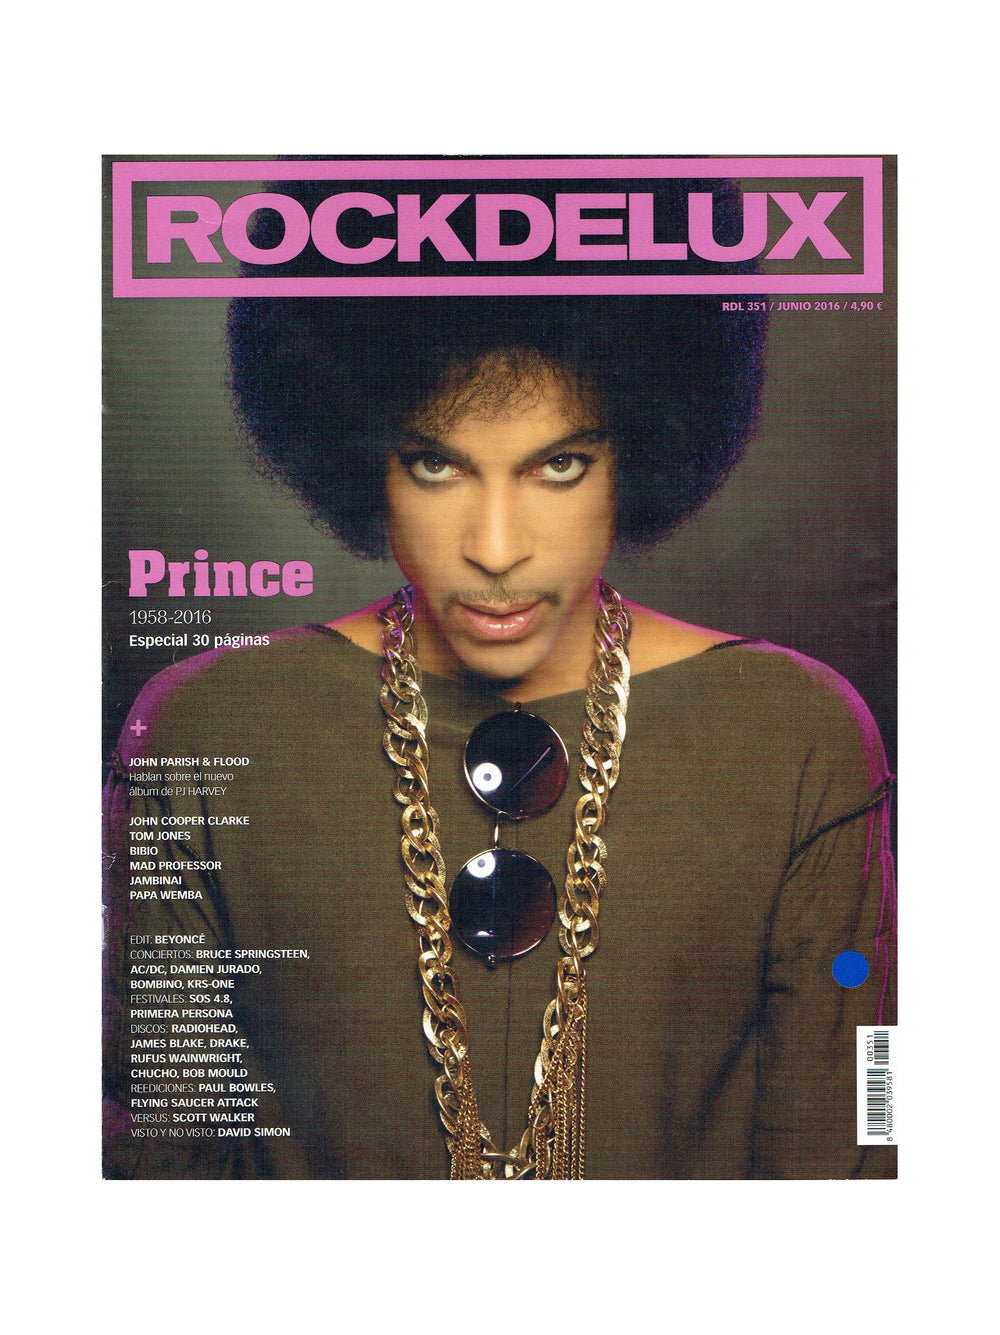 Prince – RockDelux Magazine June 2016 Spanish Language Cover & 17 Pages